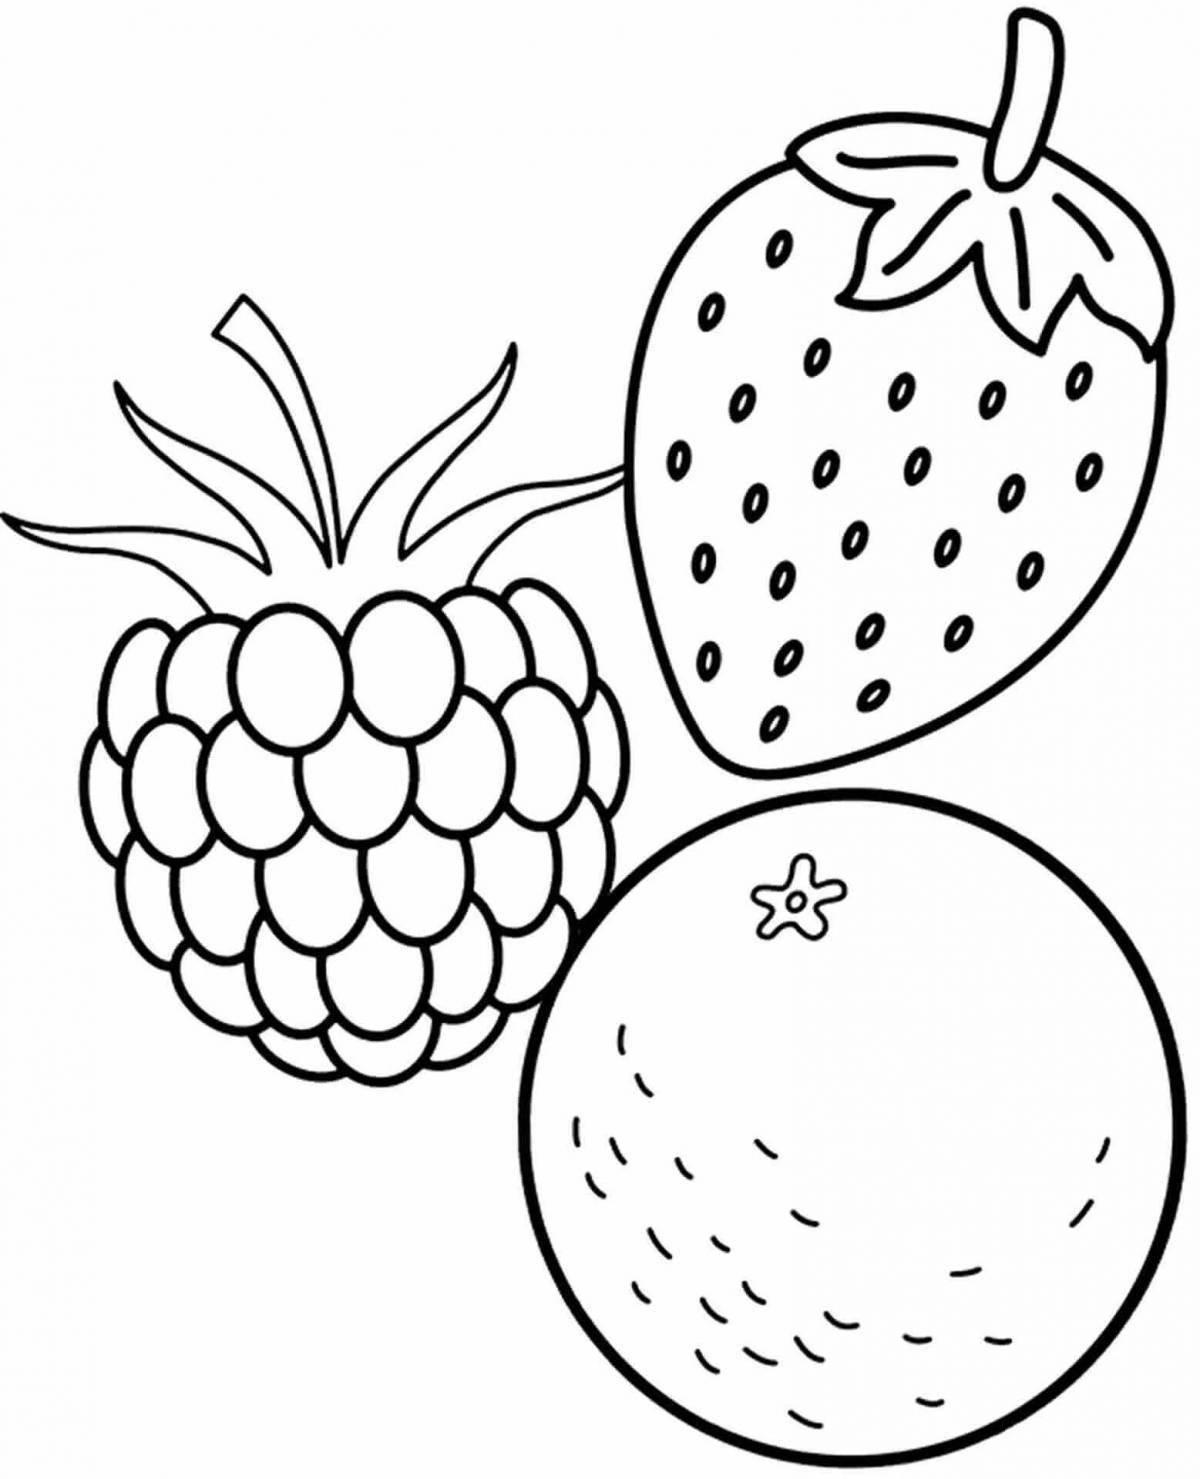 Fancy strawberry coloring book for kids 5-6 years old